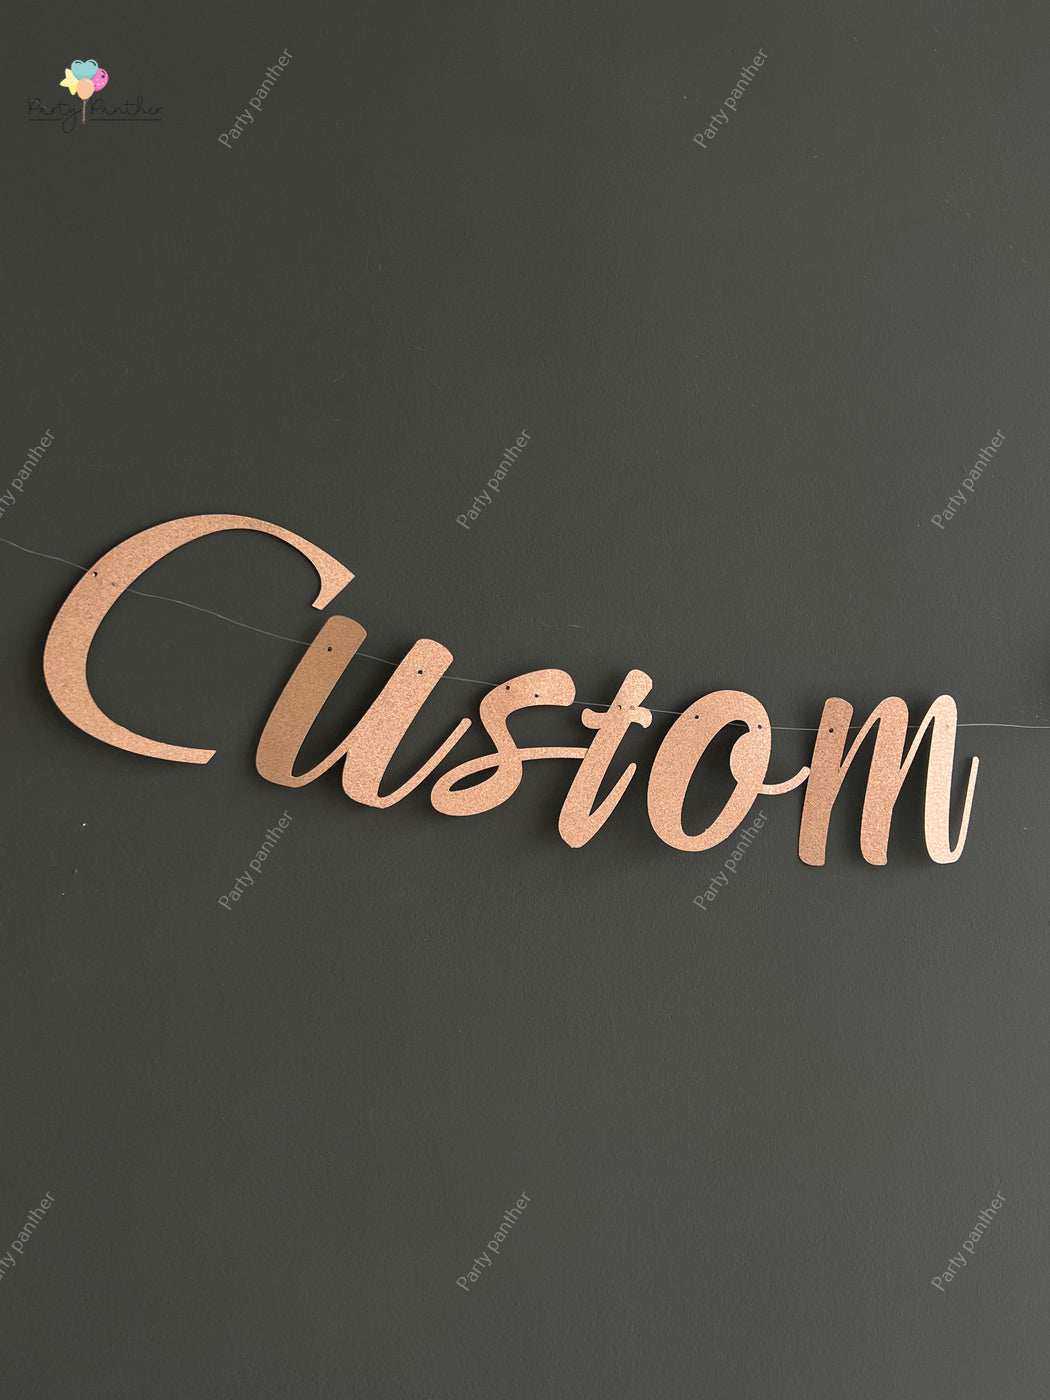 Customised Cursive Glitter Rose Gold Banner - Personalized Handmade party decorations for all occasions